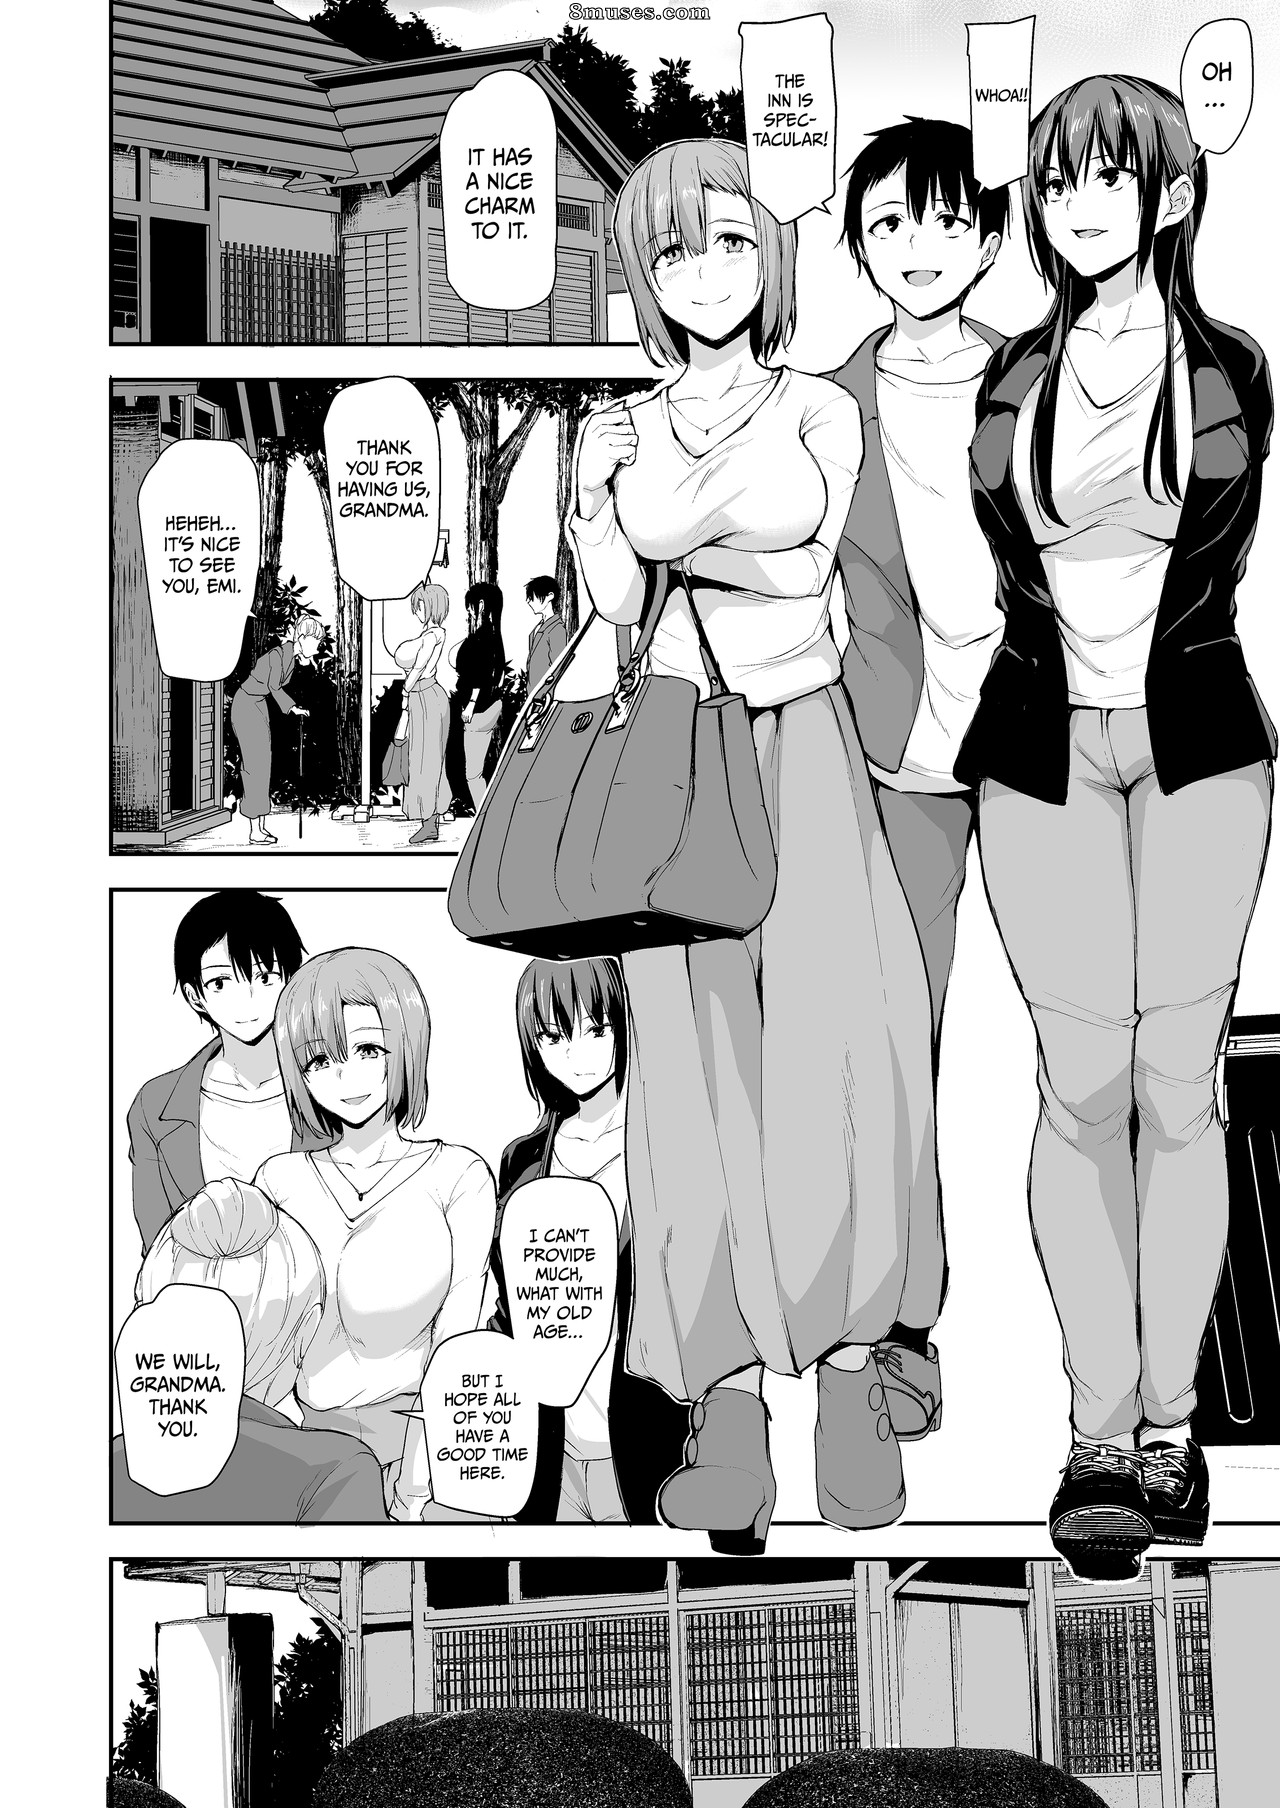 Page 5 Fakku-Comics/SHIMA-PAN-Tachibana-Omina/I-Cant-Get-it-Up-Without-Two-Pairs-of- Big-Breasts-So-My-Wife-Brought-Her-Friend-2 8muses pic